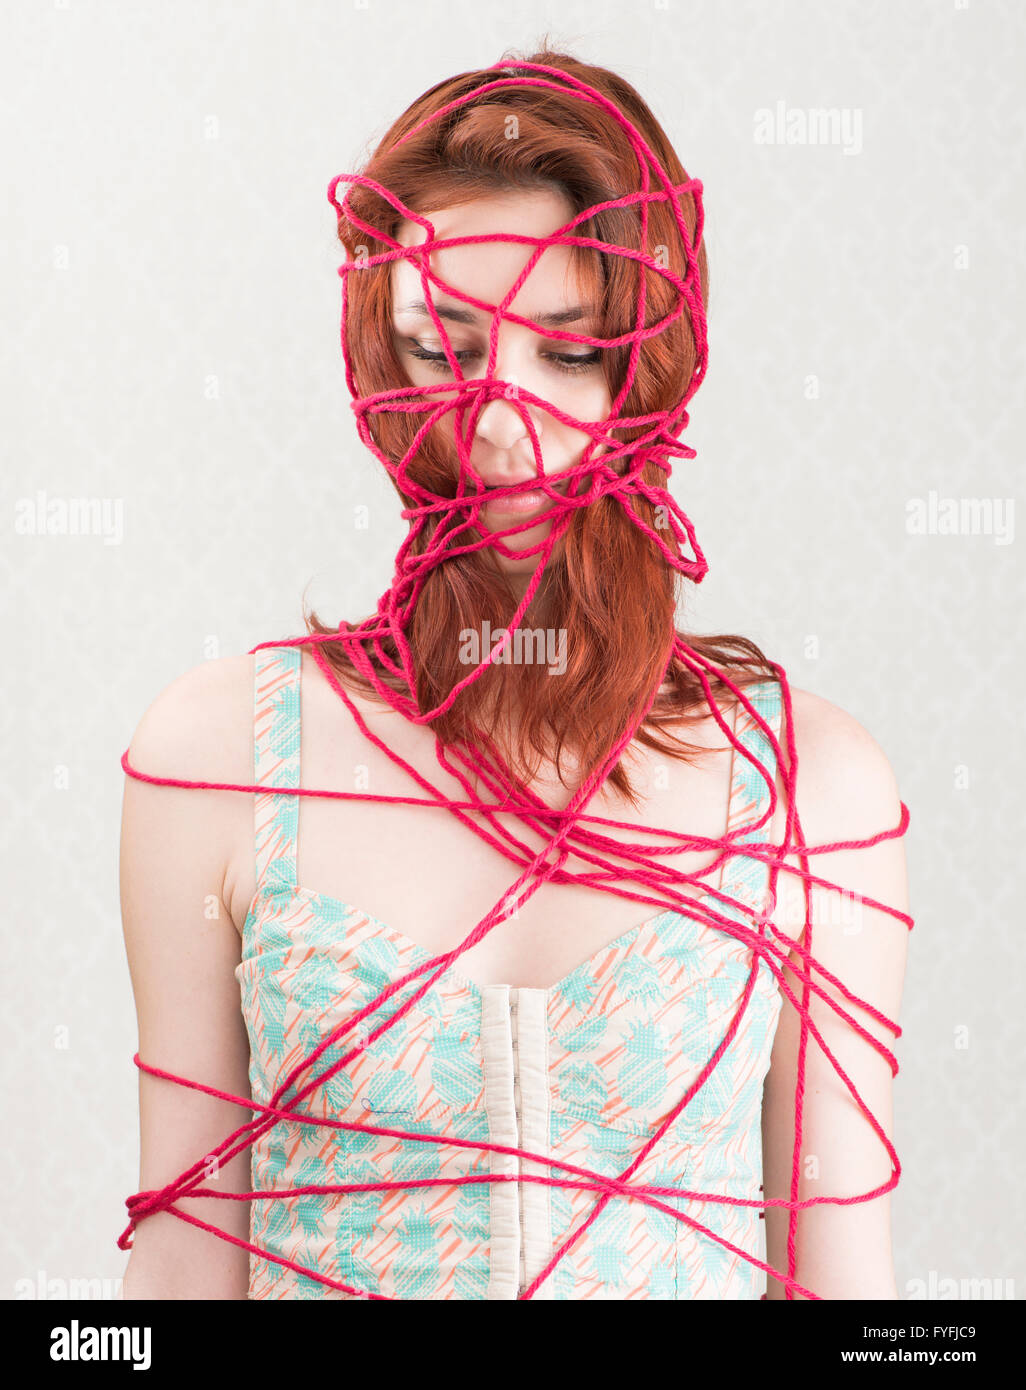 Woman constrained with pink cotton yarn Stock Photo